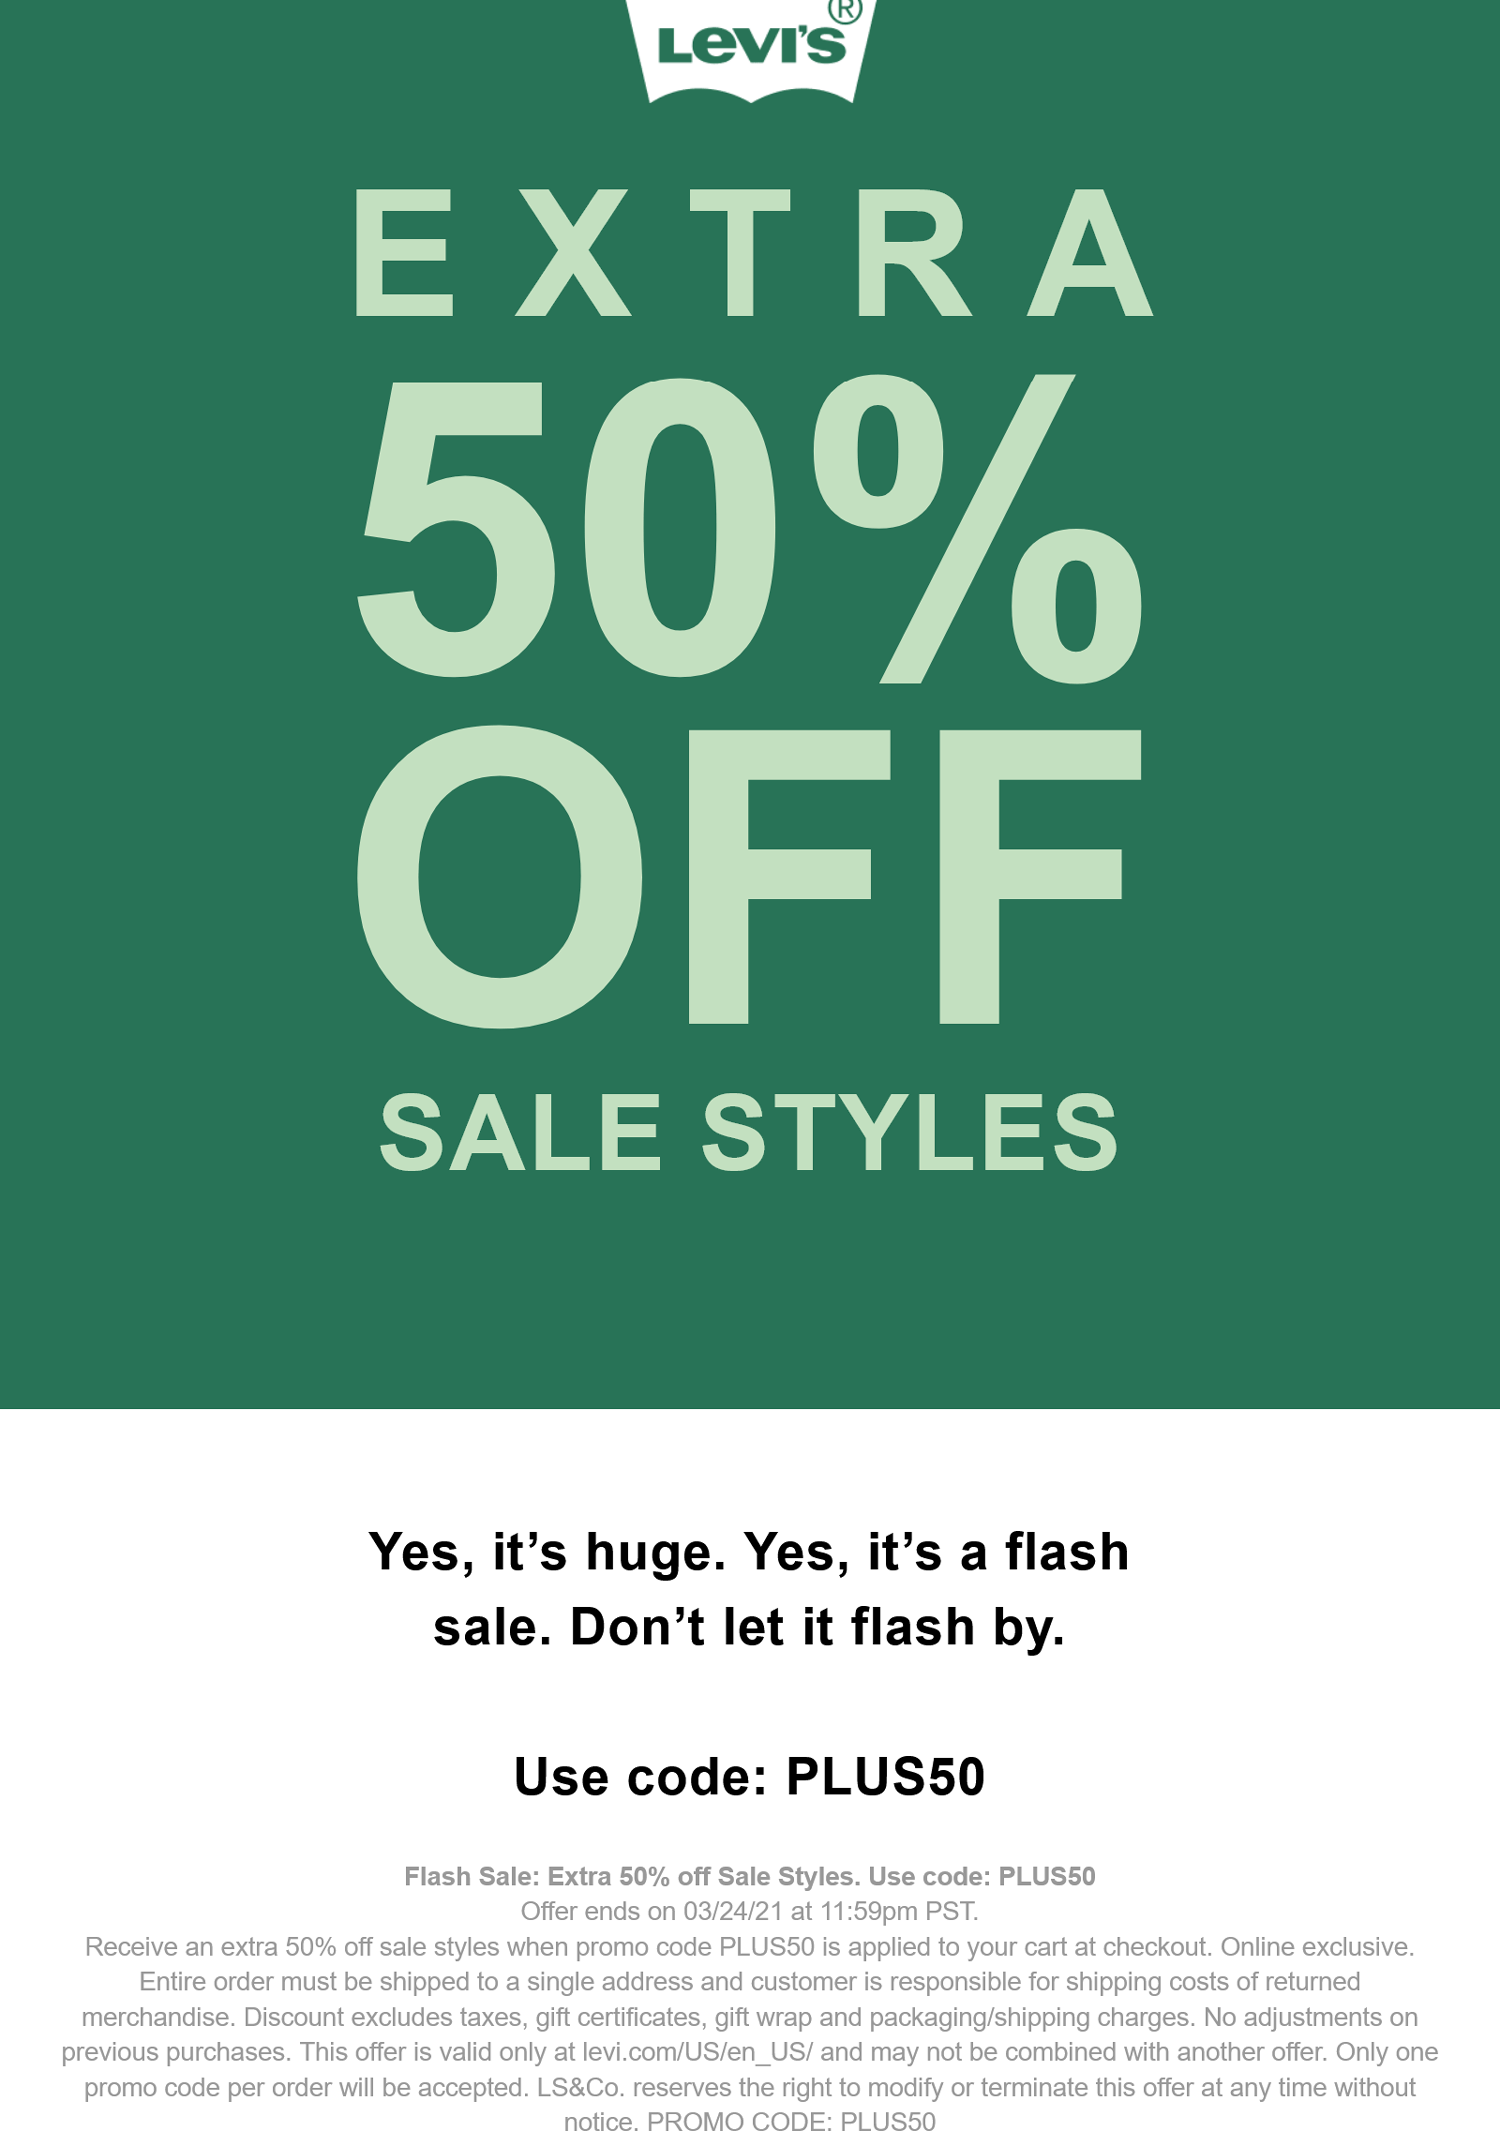 [August, 2021] Extra 50 off sale styles at Levis via promo code PLUS50